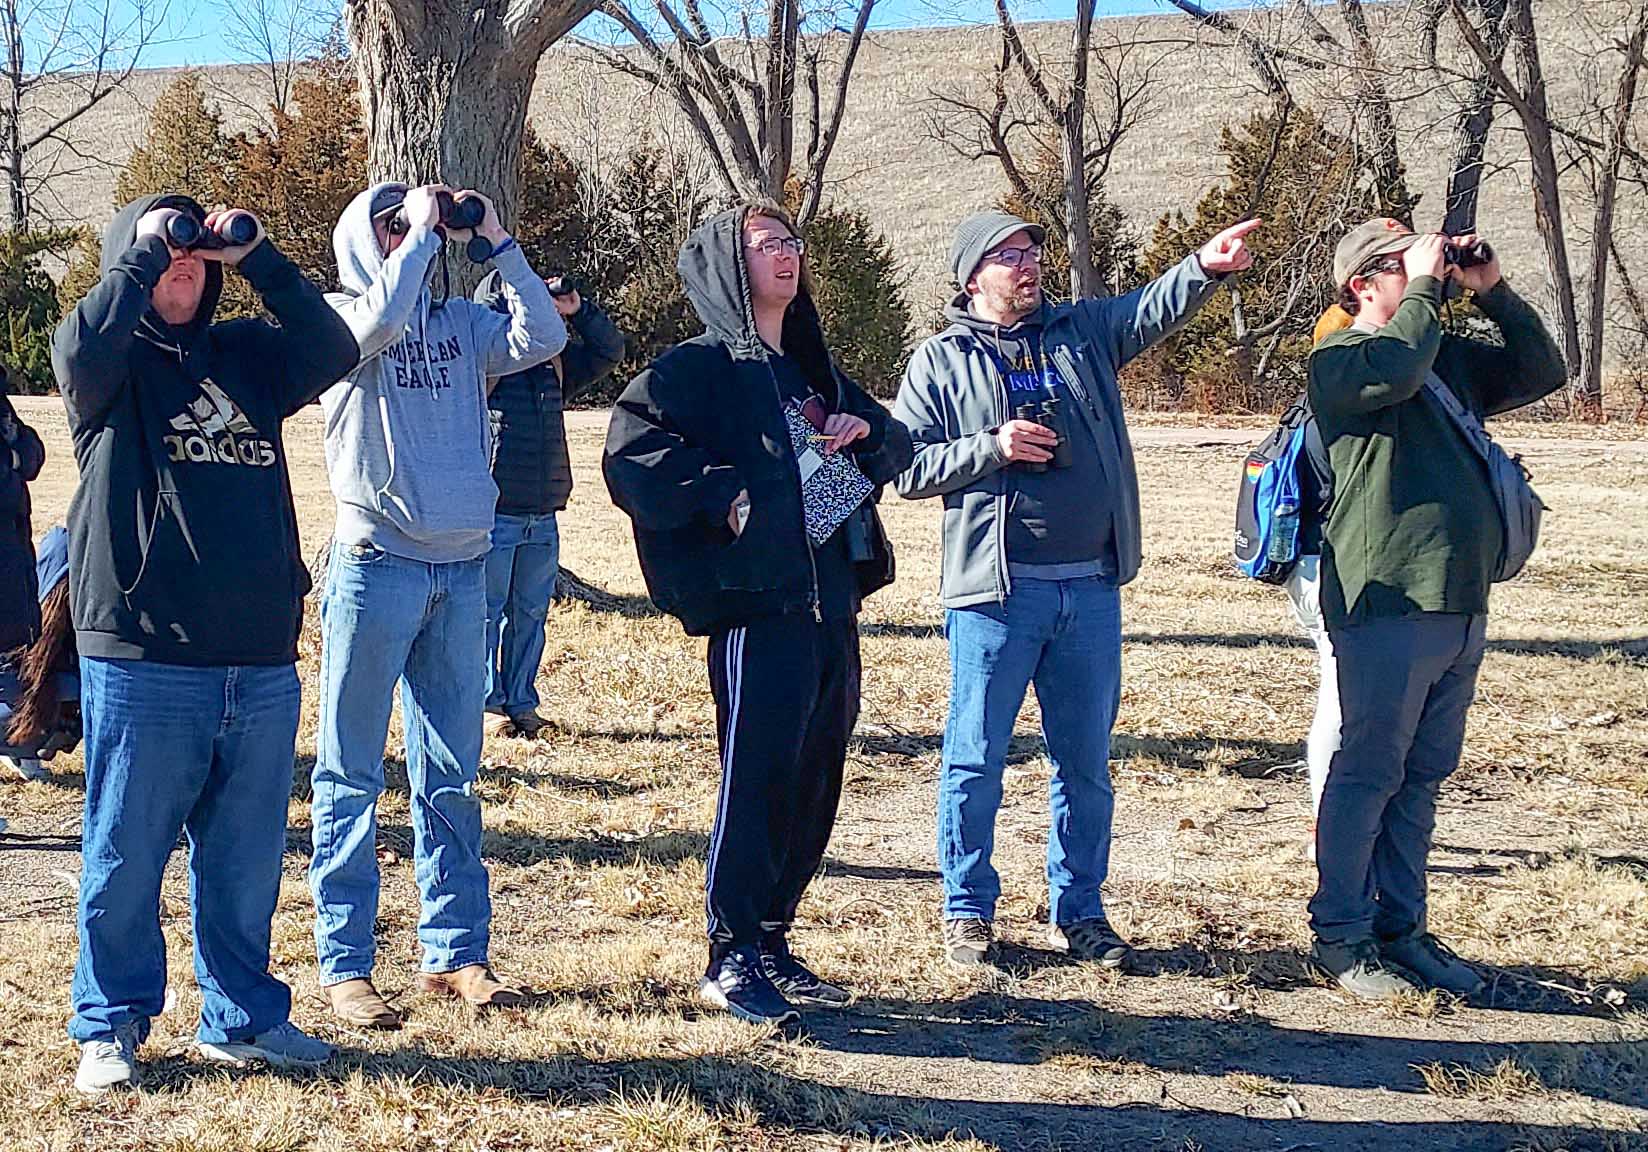 Students view eagles near Kingsley Dam